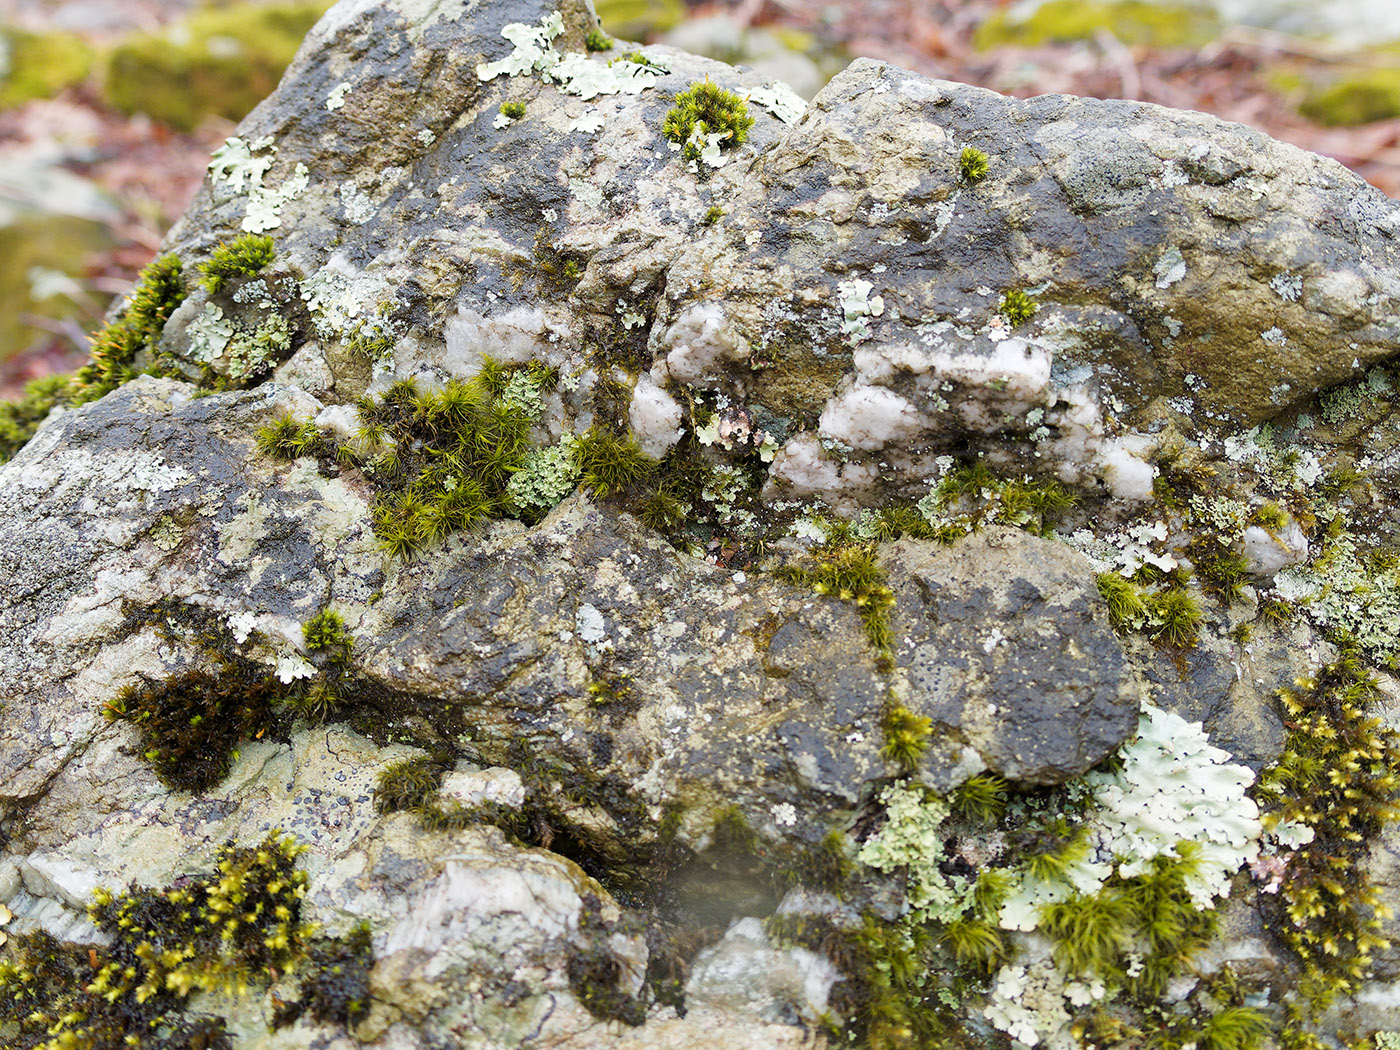 Swift run conglomerate includes quartz deposits and is covered by lichen.   On trail near Hawksbill Gap Park area.